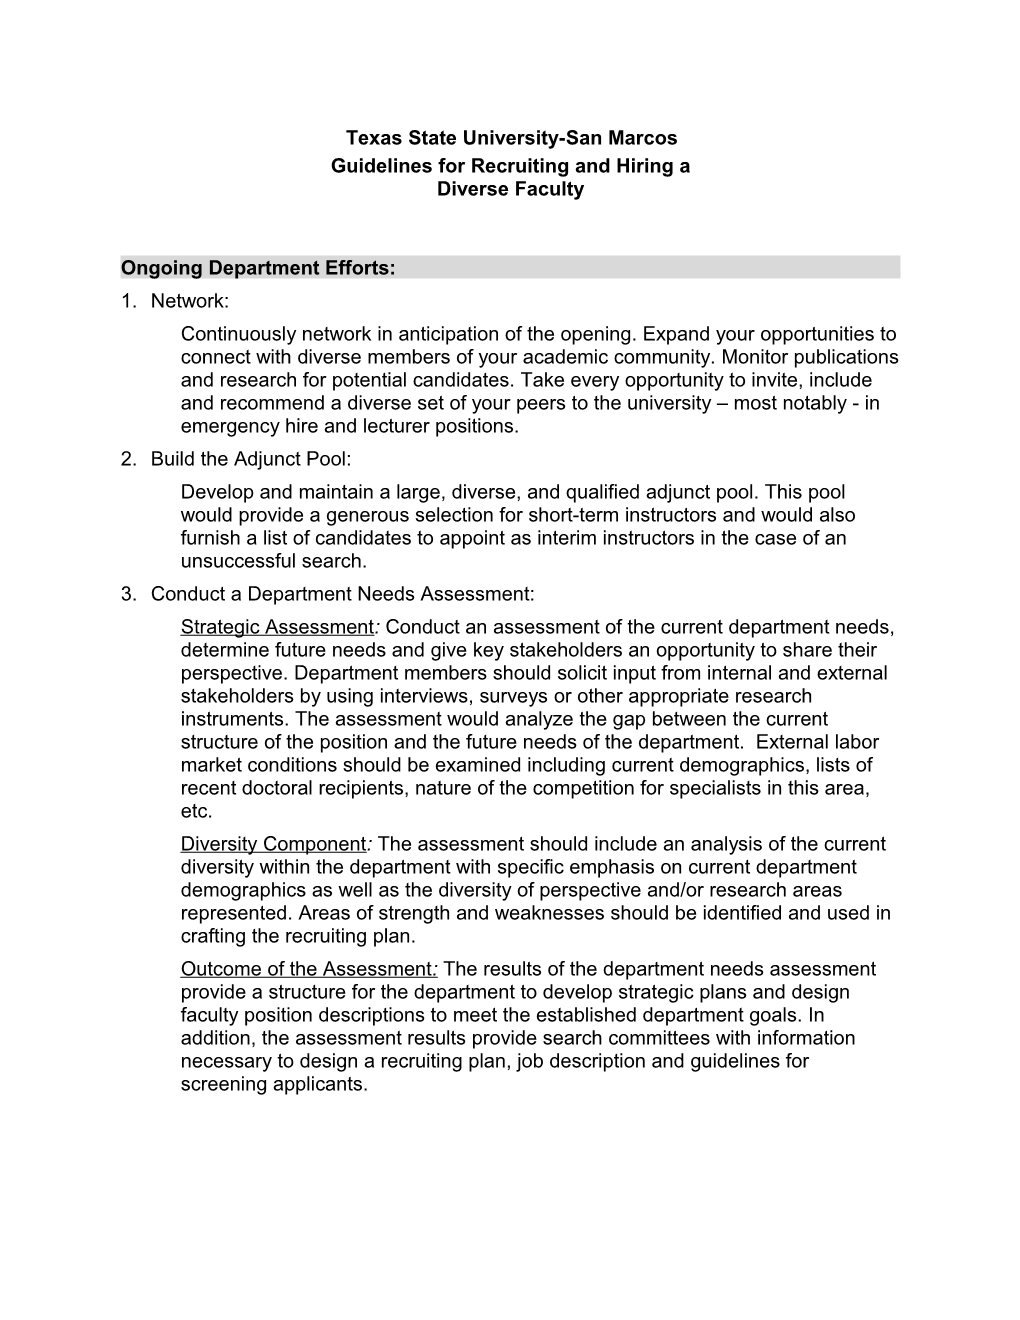 Guidelines for Integrating Equity, Access and Diversity Into SWT Faculty Hiring